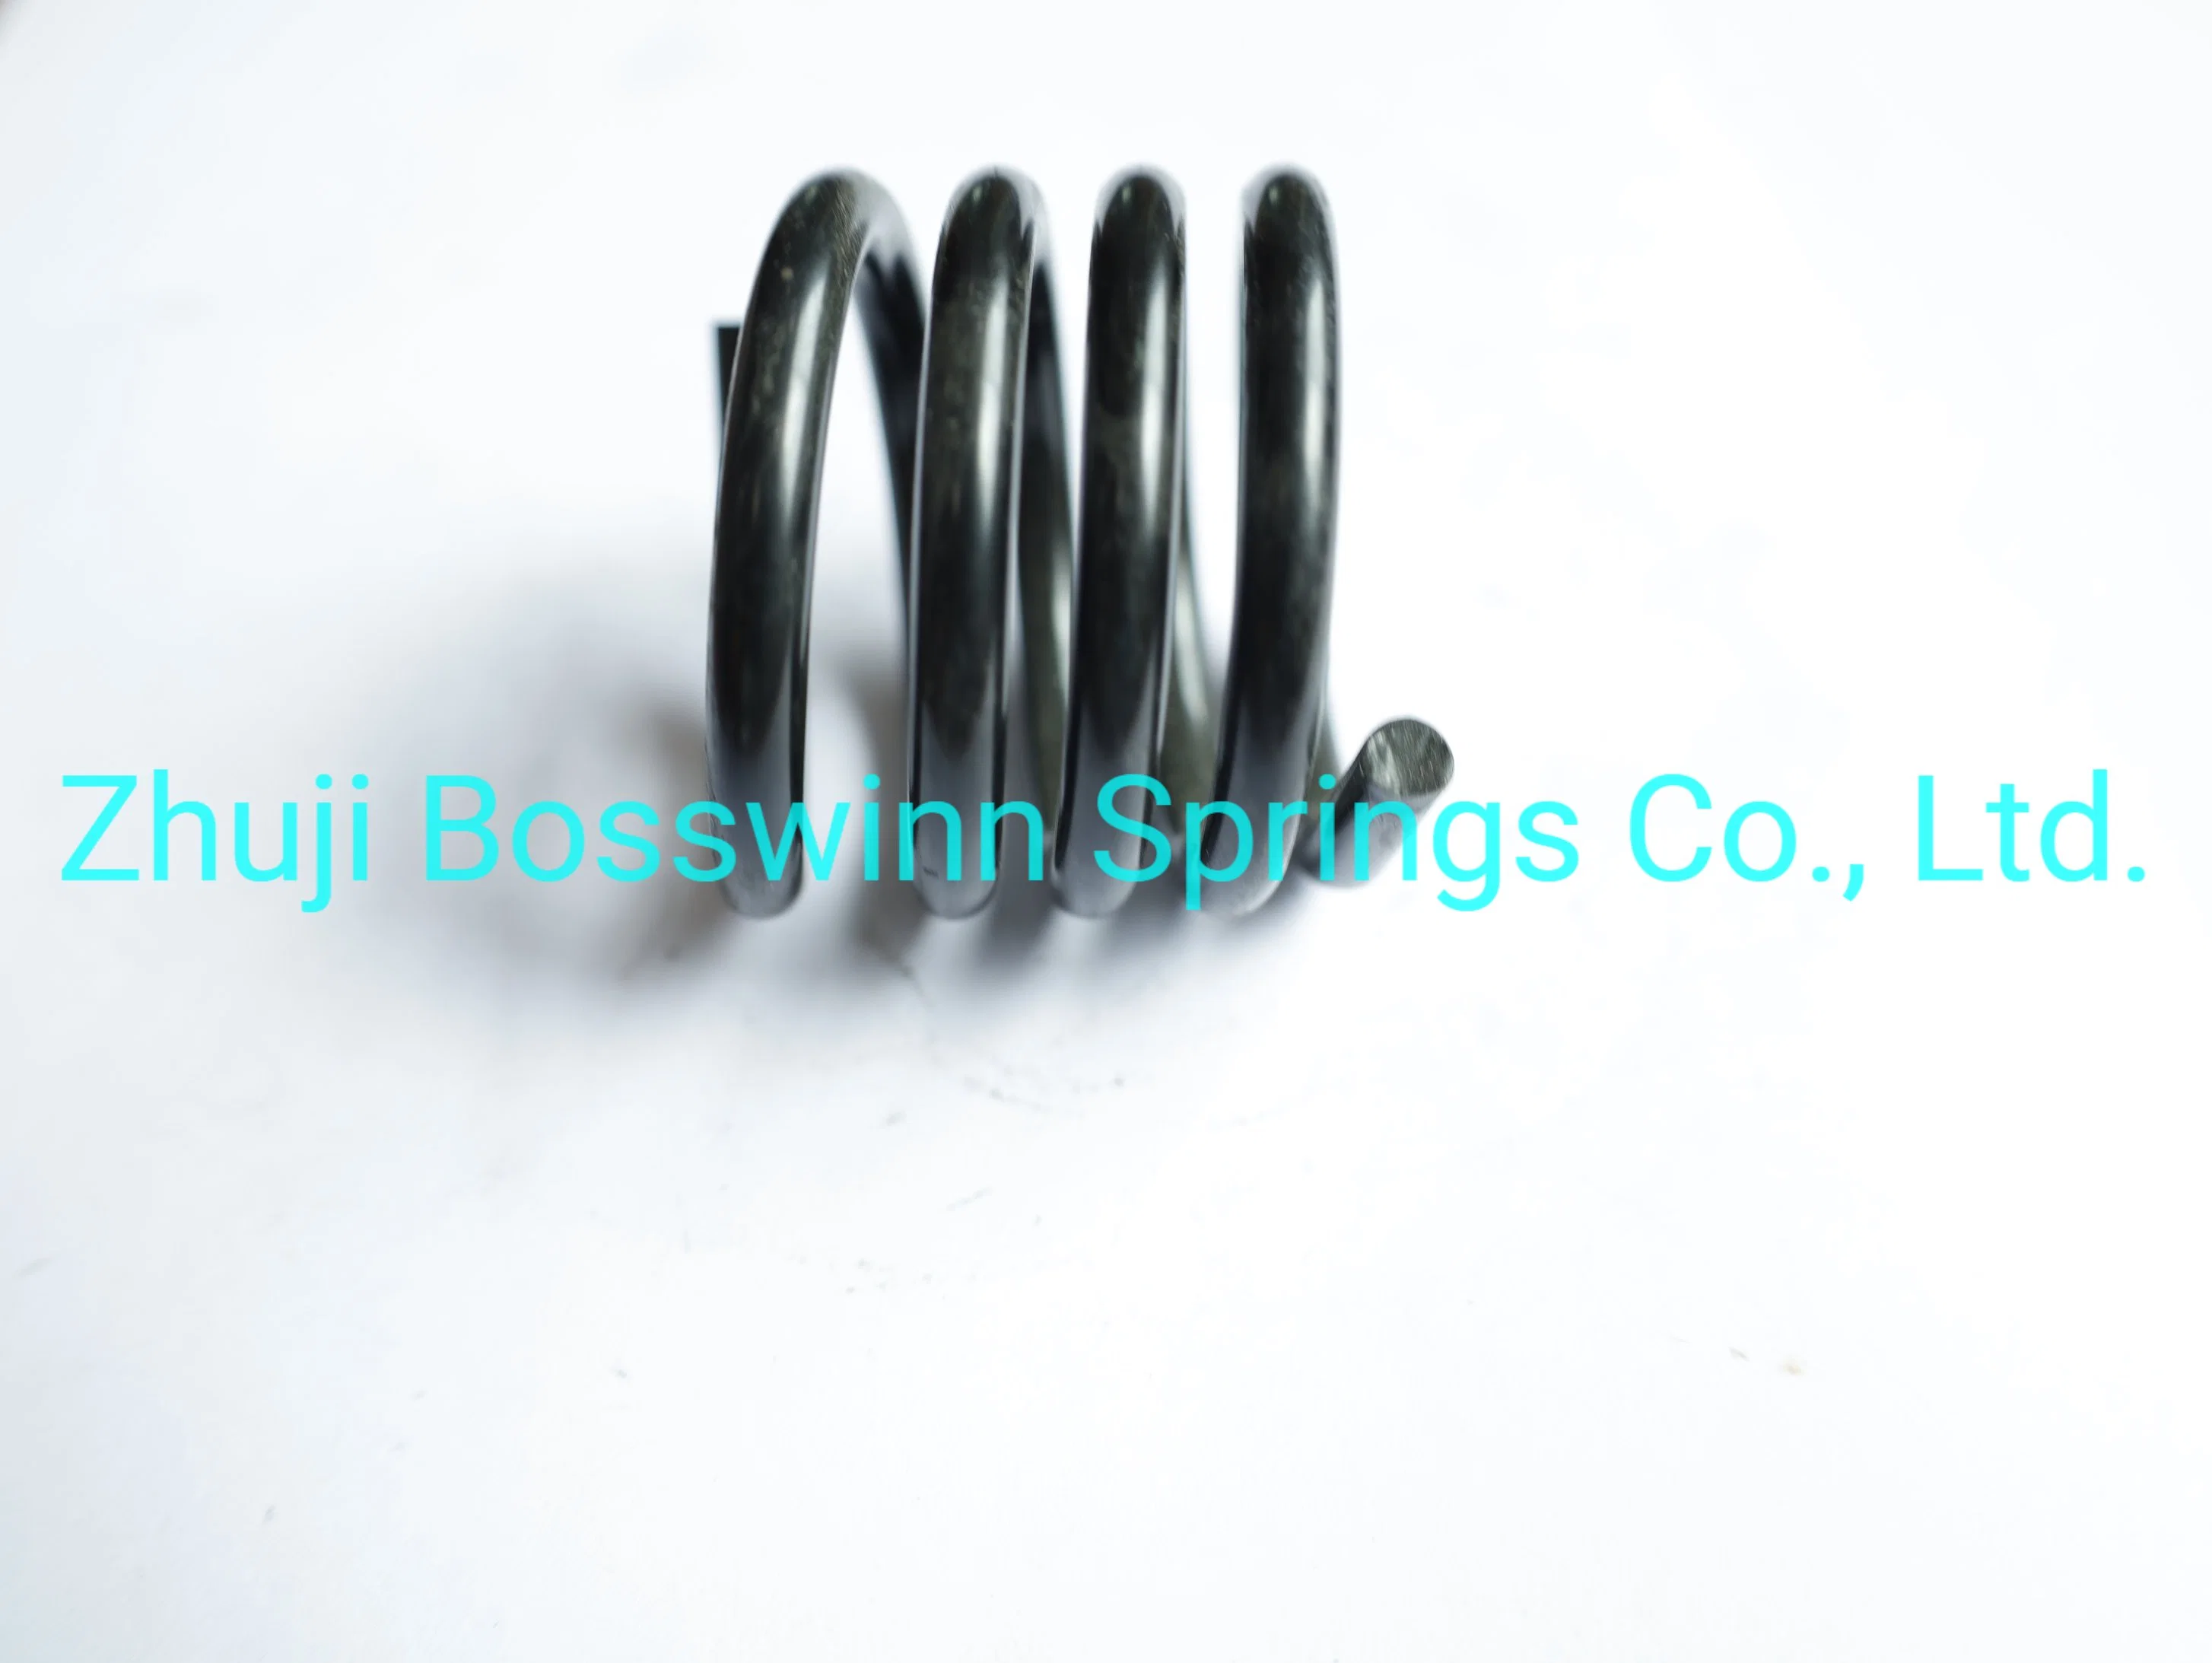 China Springs Manufacturer USA Industial Machinery Spring Accessories

Fabricant de ressorts en Chine USA Accessoires de machines industrielles à ressorts